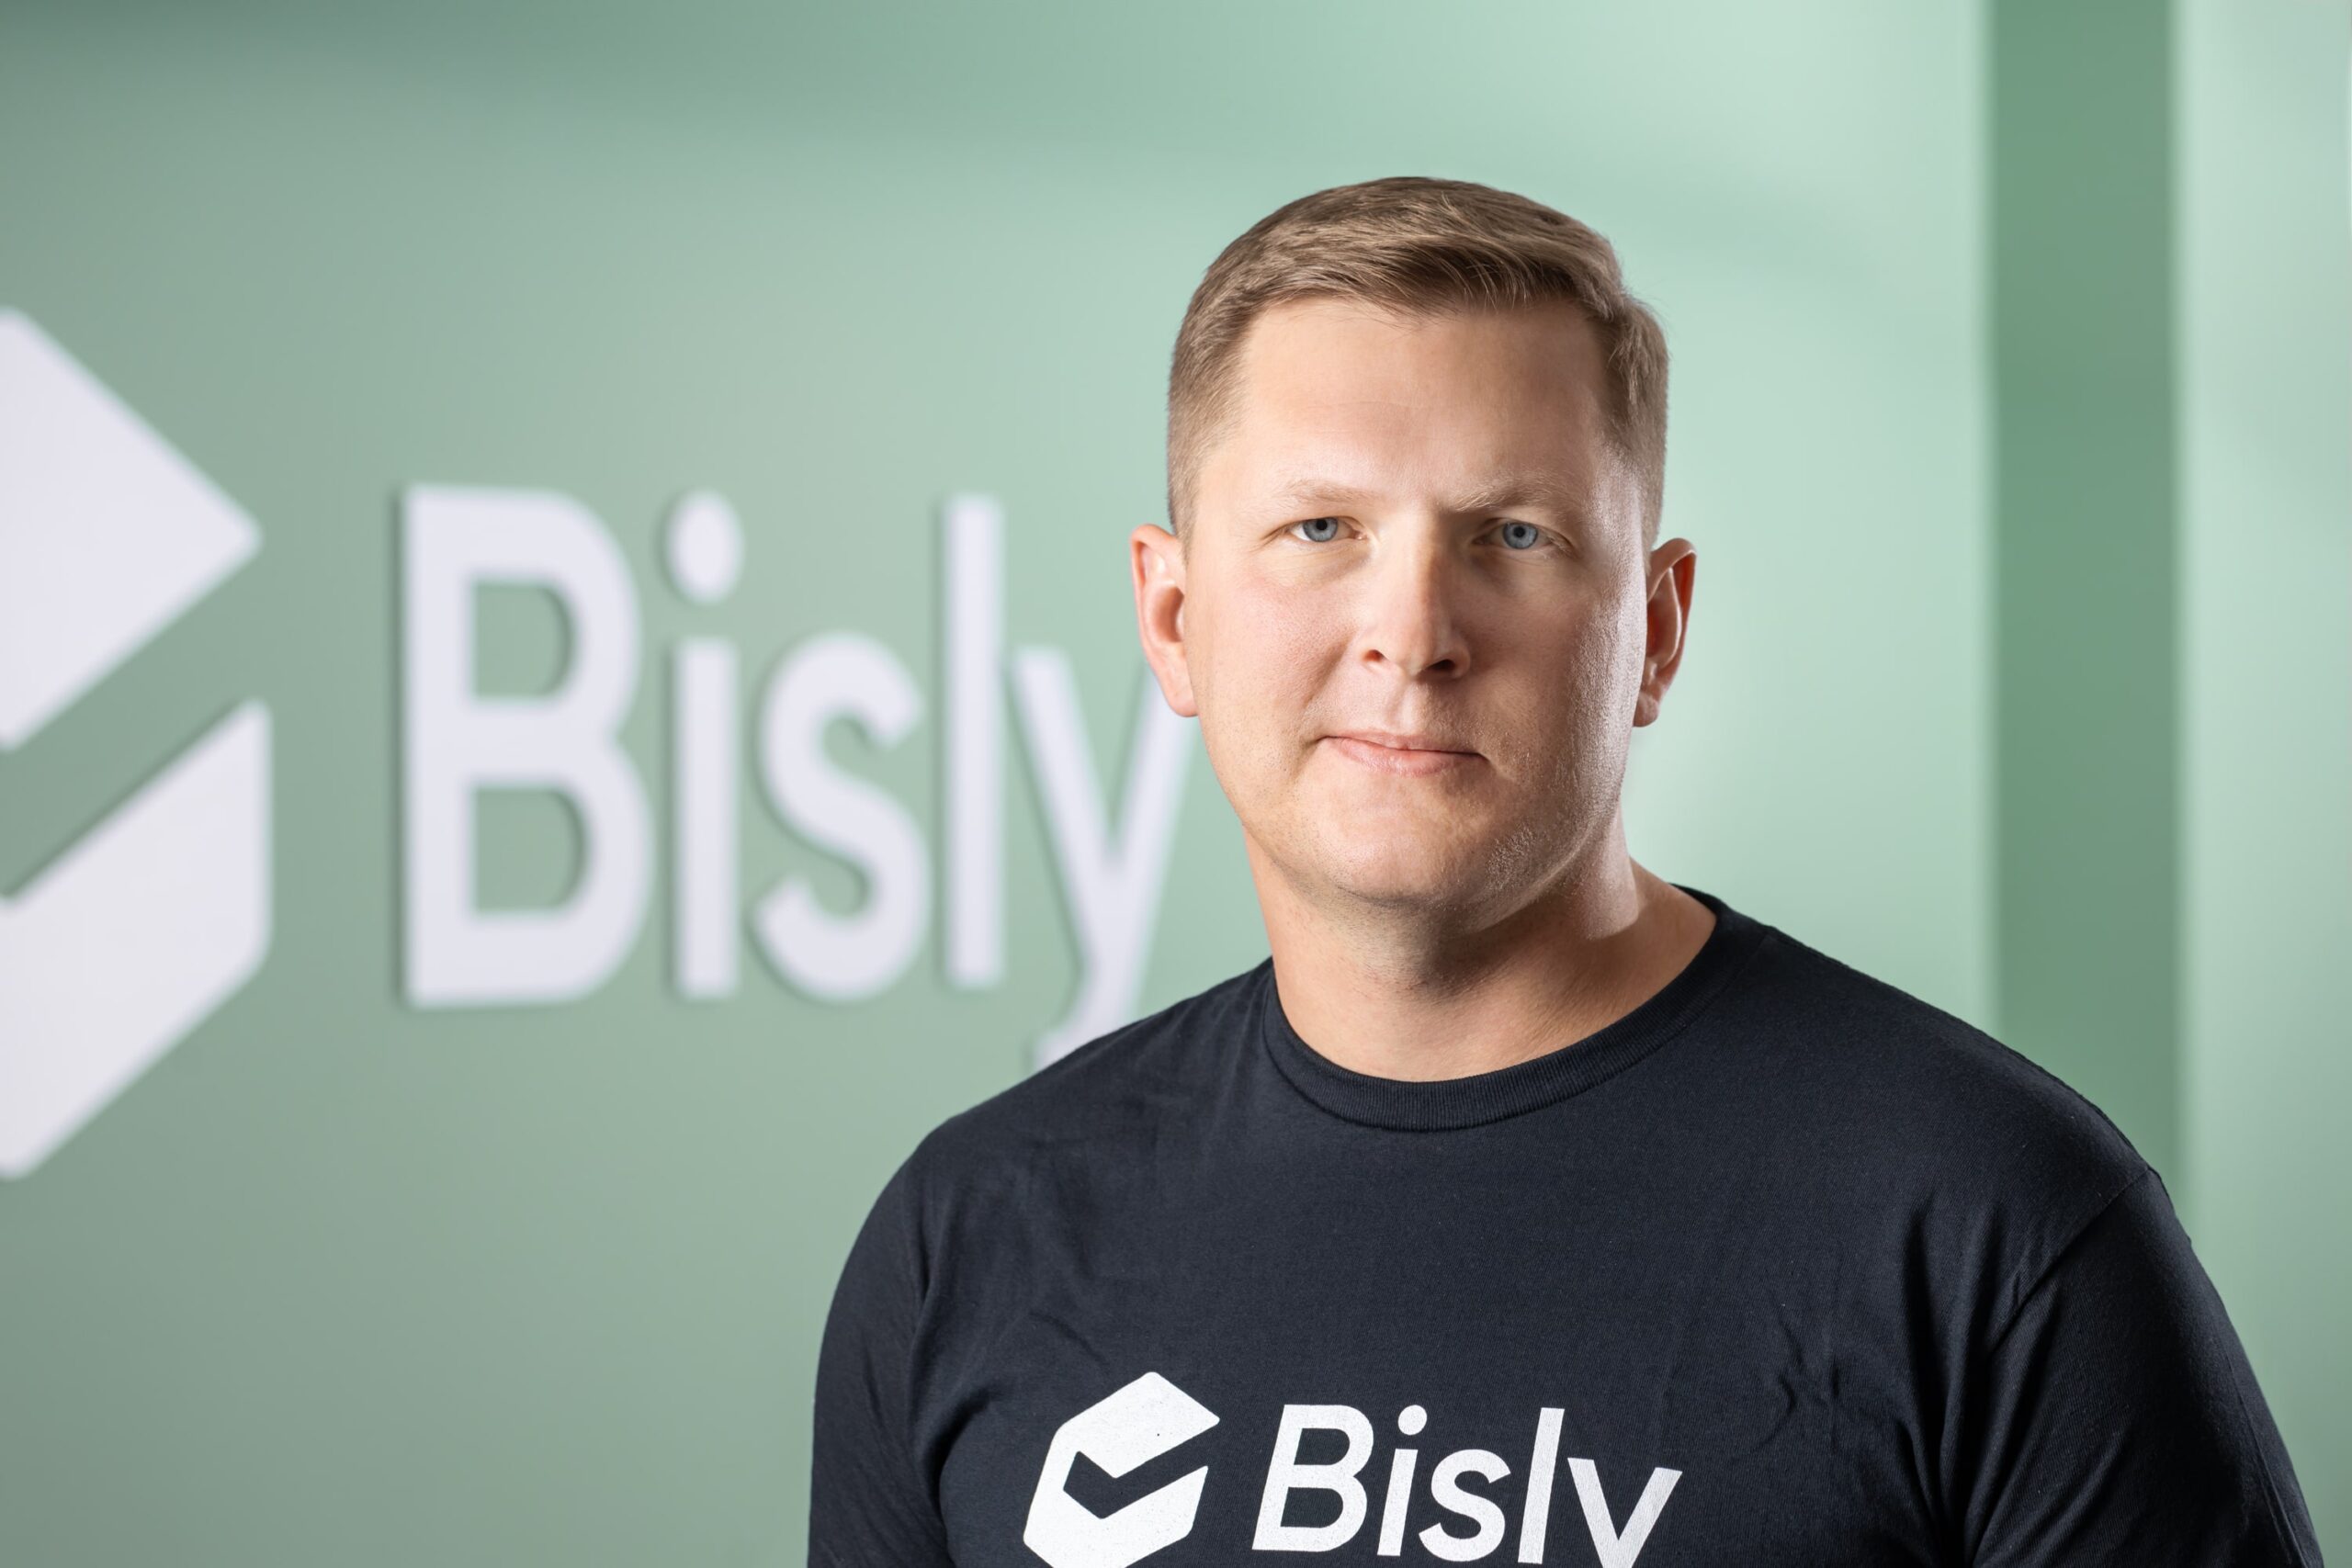 Skeleton’s top executive Ants Vill will be joining Estonian prop-tech startup Bisly - Bisly